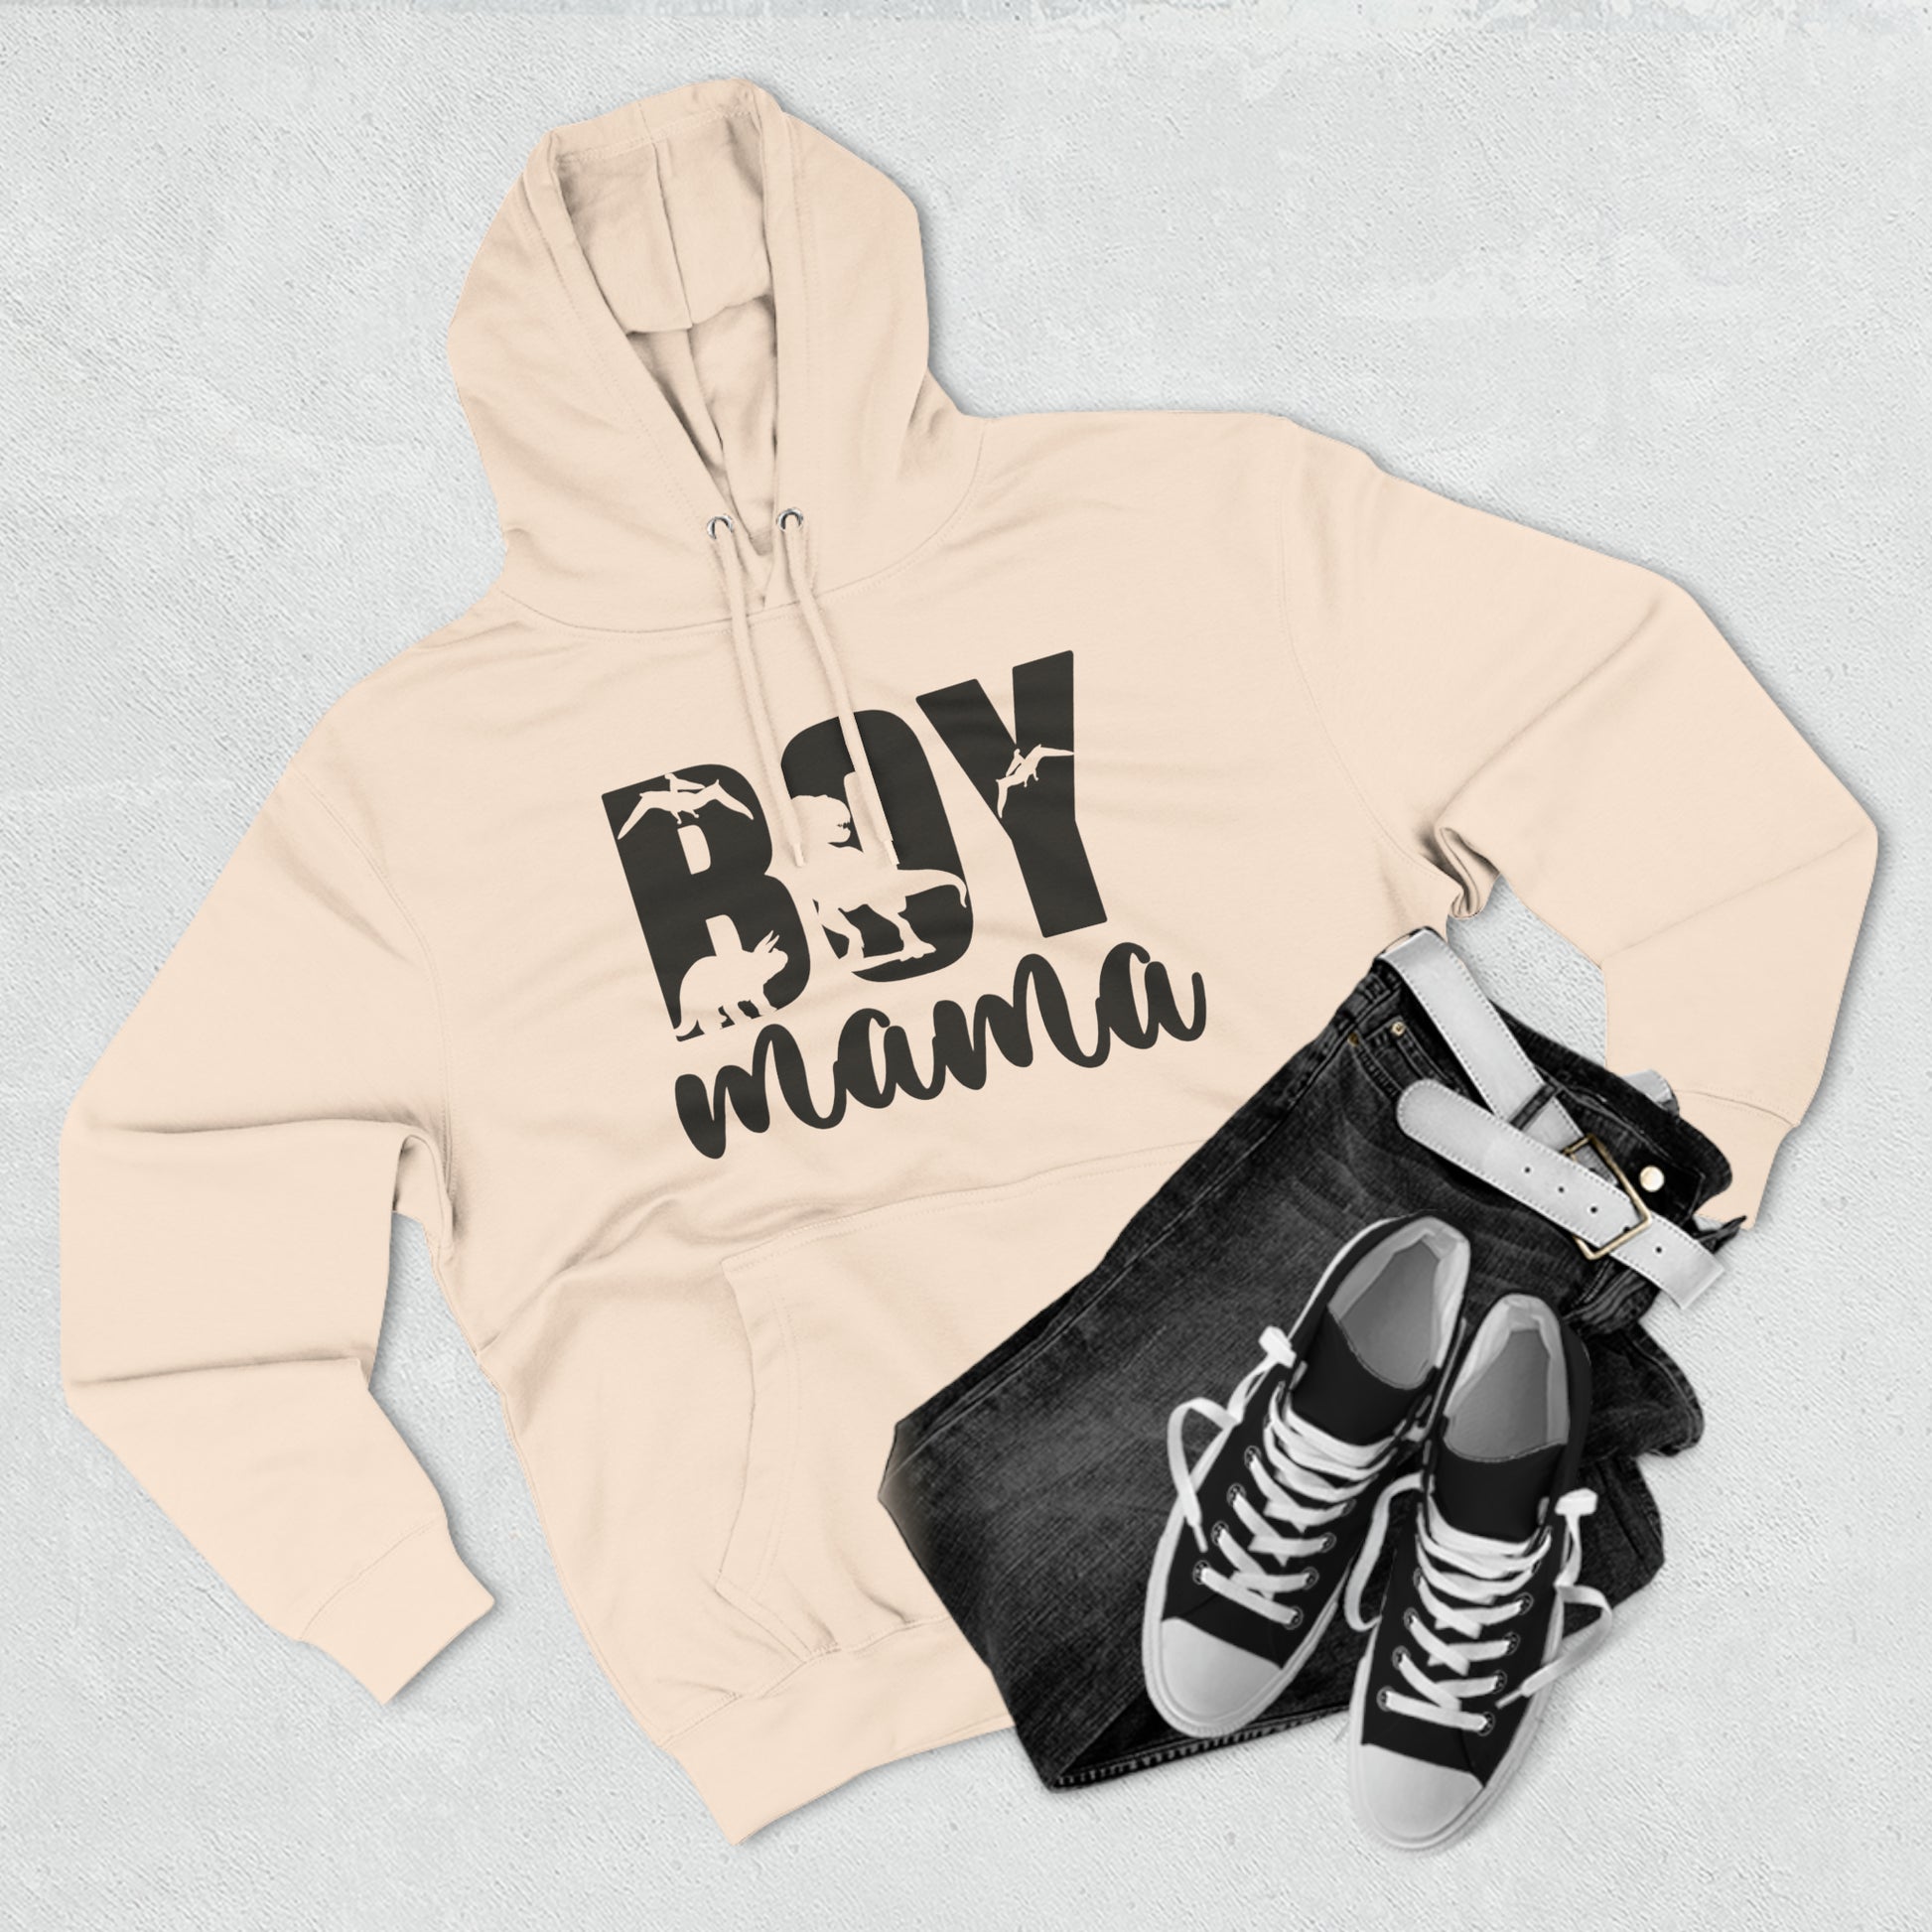 "Boy Mama" Hoodie - Weave Got Gifts - Unique Gifts You Won’t Find Anywhere Else!